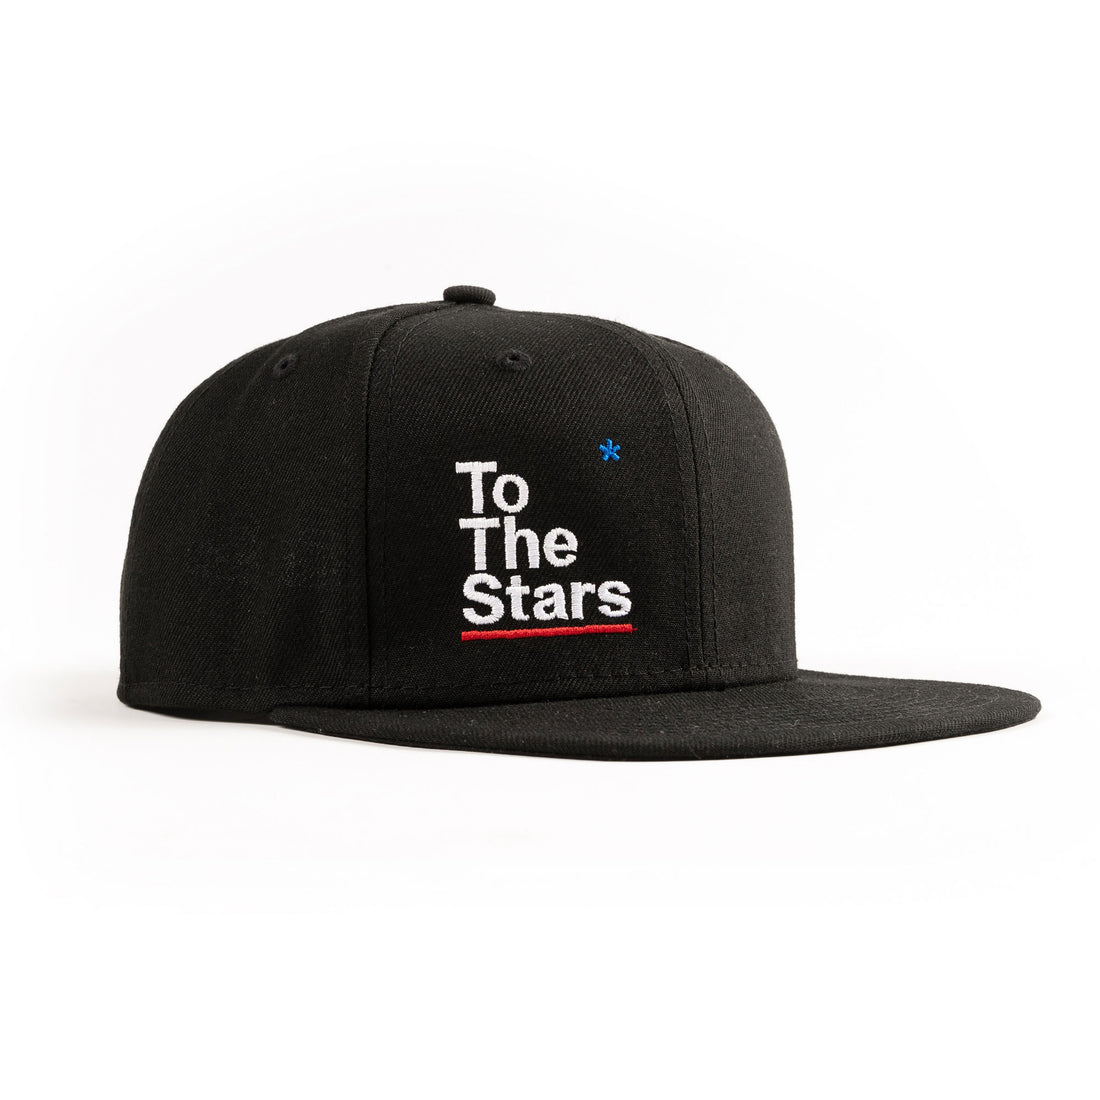 To The Stars* Package New ERA 9Fifty Snapback Hat Black Side